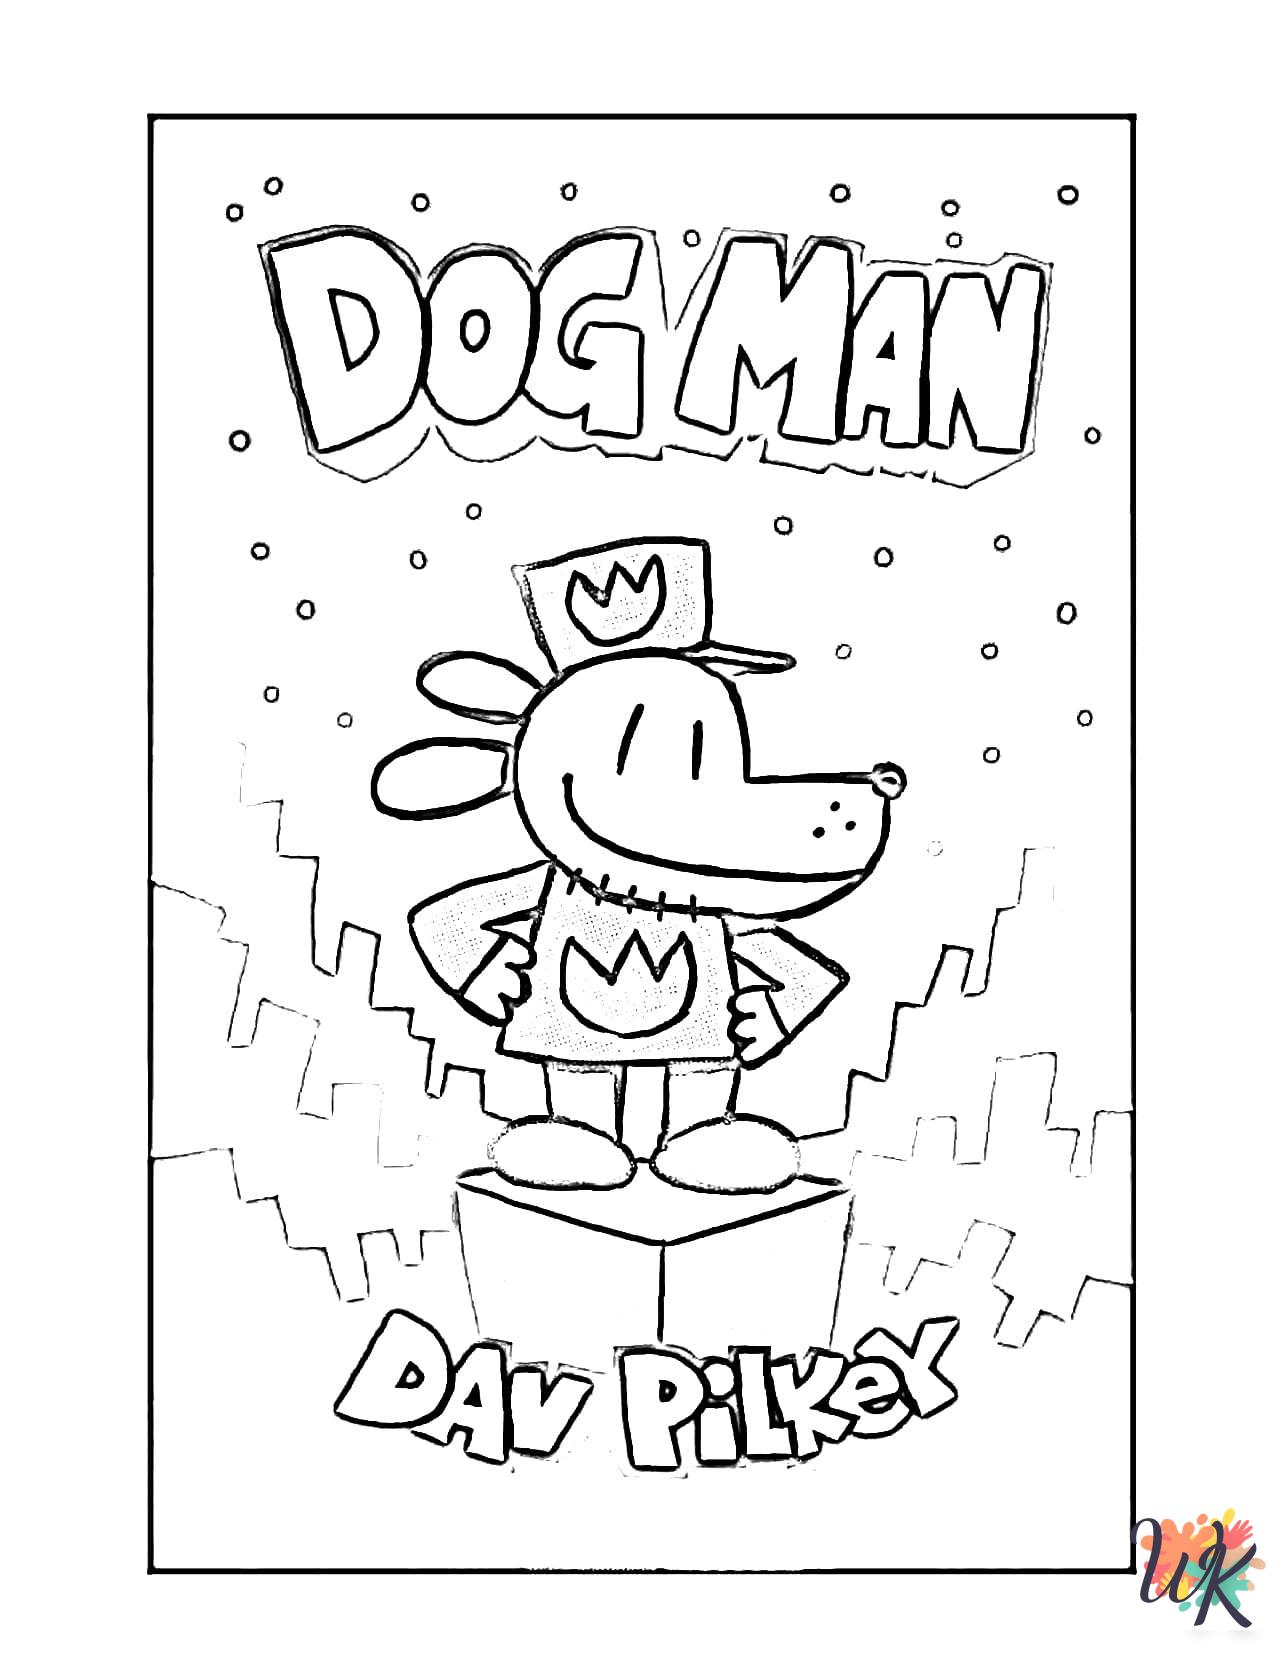 Dog Man free coloring pages